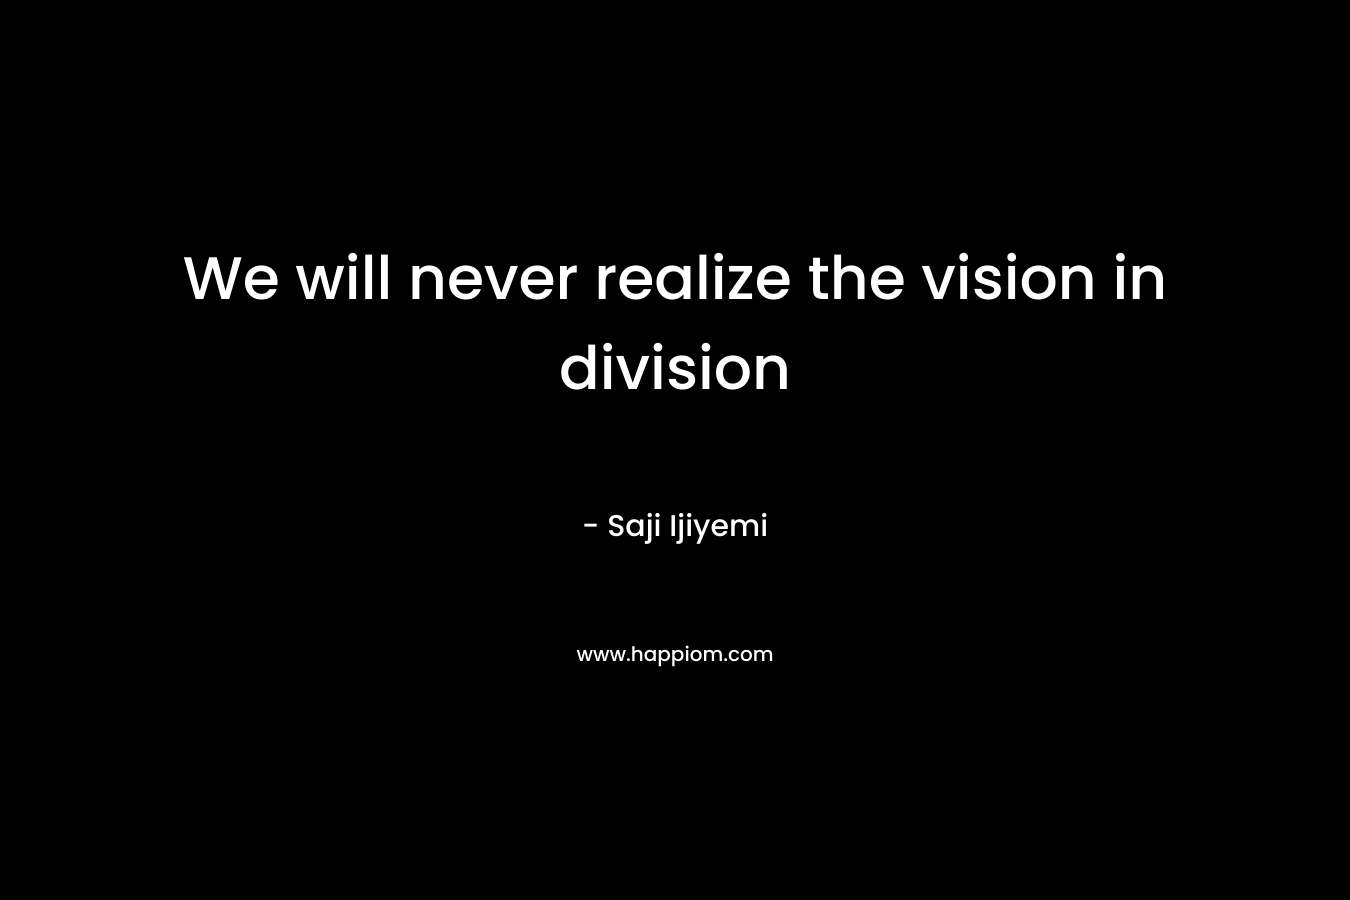 We will never realize the vision in division